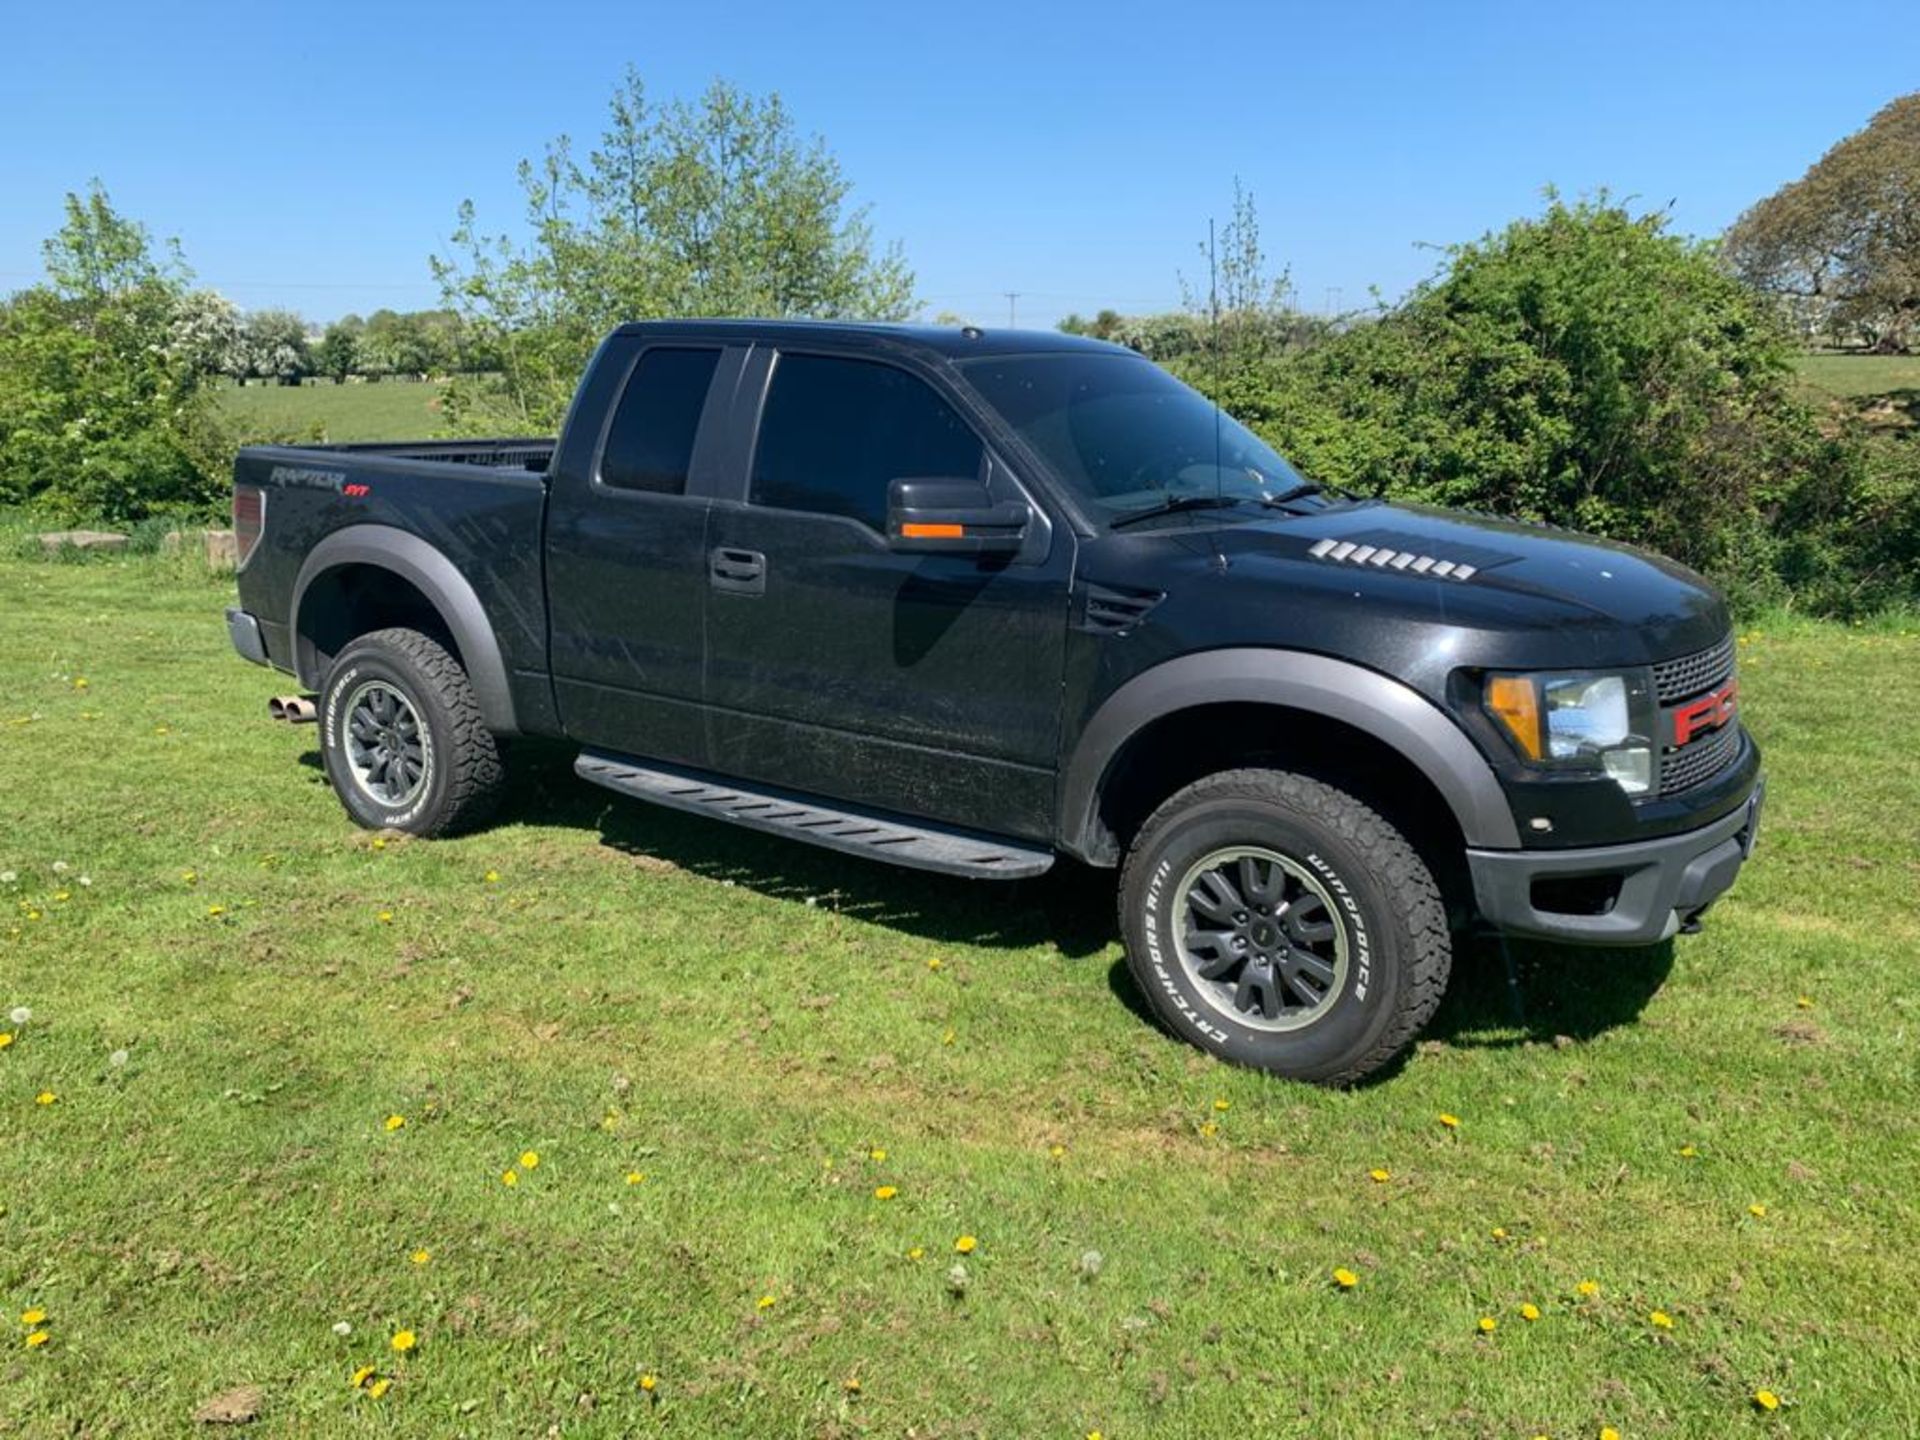 2012 FORD F-150 RAPTOR - 65,000 MILES, LOTS OF UPGRADED PARTS, READY IN UK WITH NOVA APPLICATION - Image 4 of 18